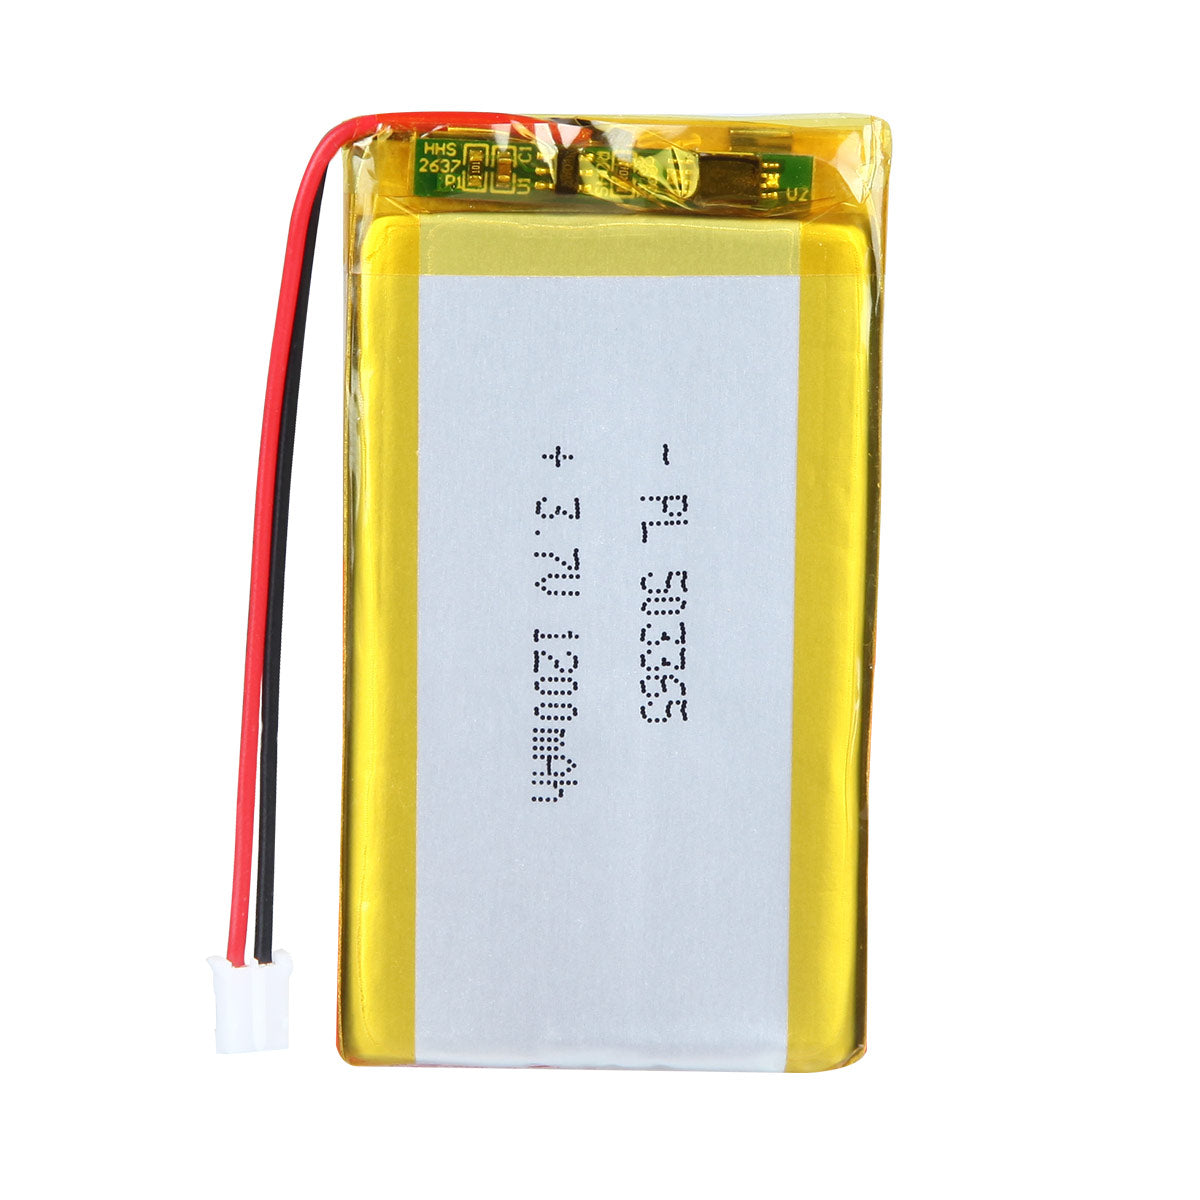 YDL 3.7V 1200mAh 503365 Rechargeable Lithium Polymer Battery Length 67mm